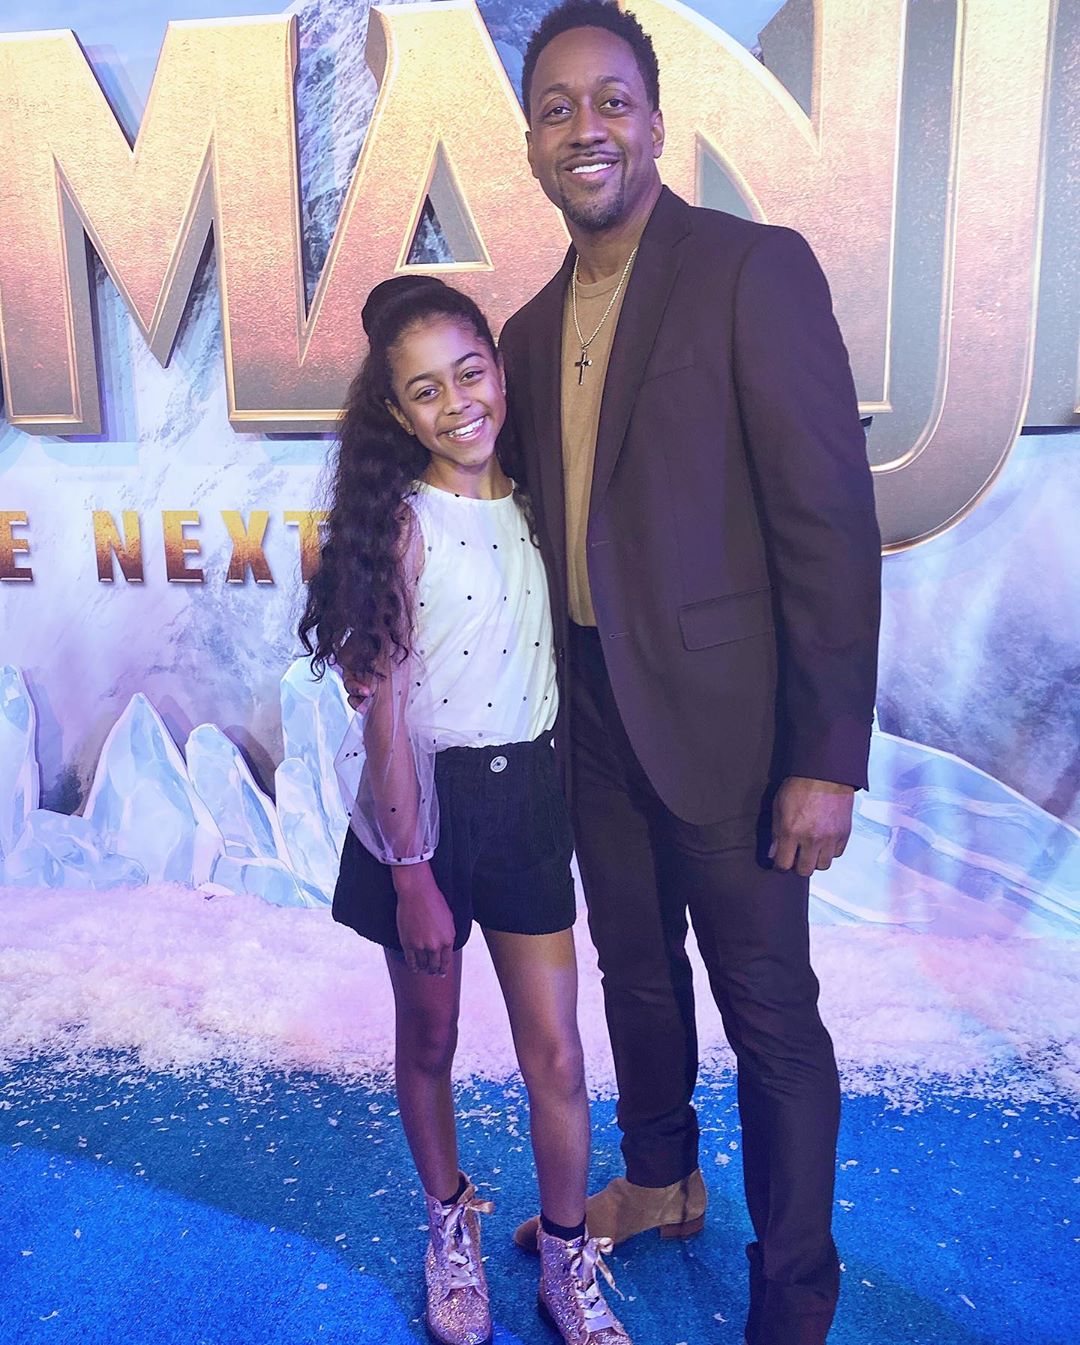 Jaleel White and his daughter, Samaya White, at the premiere of "Jumanji: The Next Level" on December 17, 2019. | Source: Getty Images